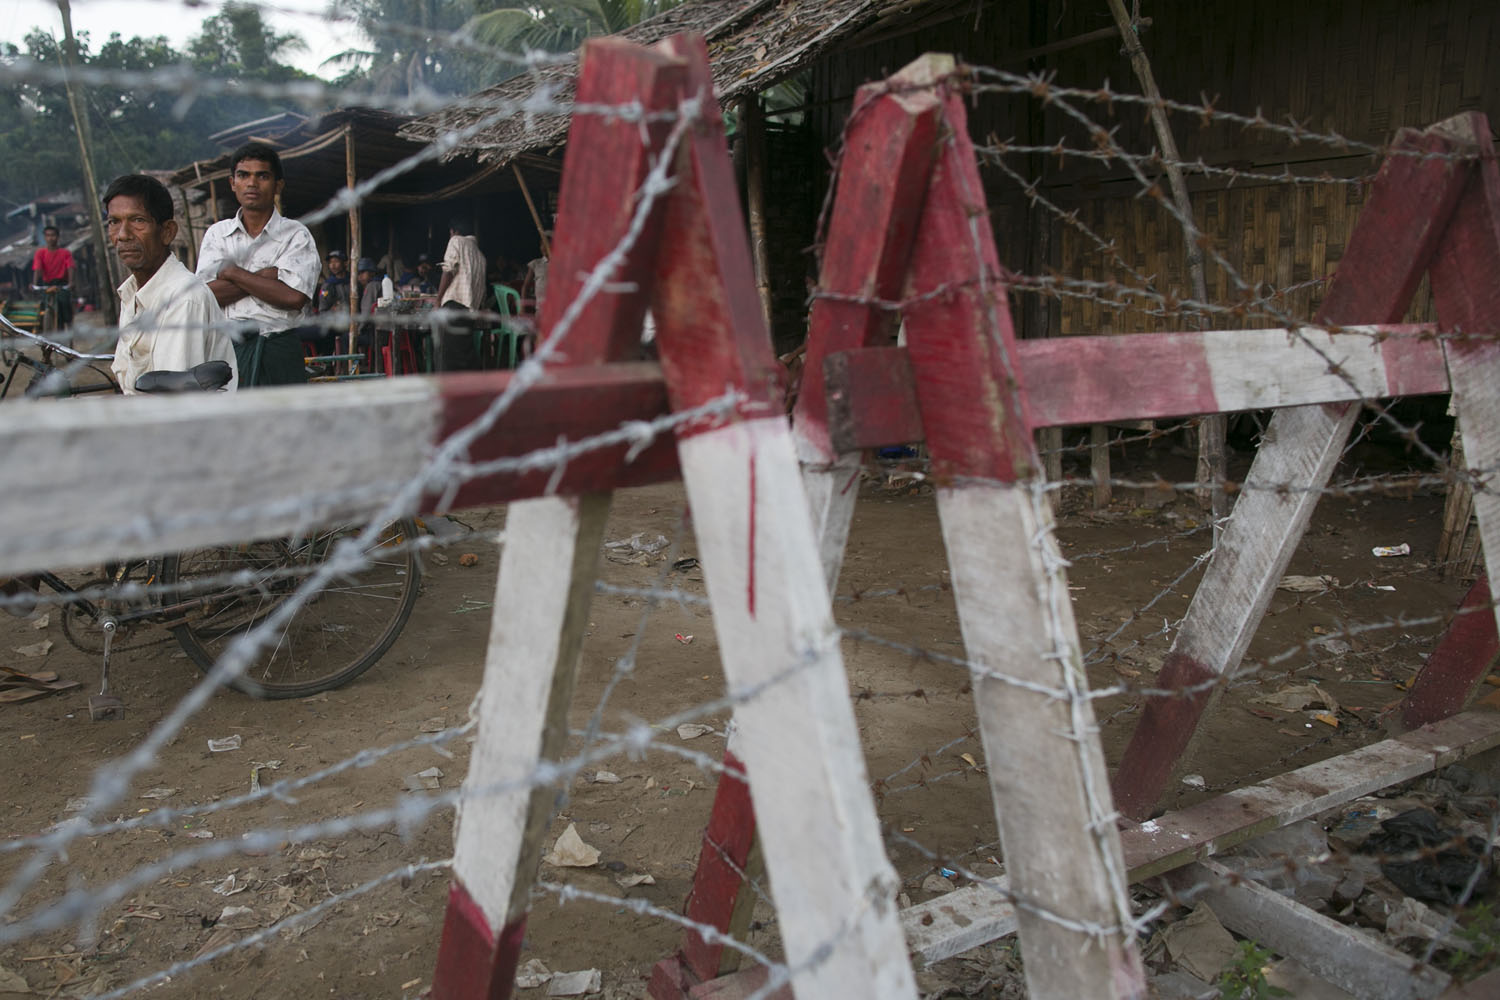 Rohingya men look out from behind a barbed-wire fence used as a barrier to restrict travel on Nov. 25, 2012, on the outskirts of Sittwe in Burma (Paula Bronstein—Getty Images)